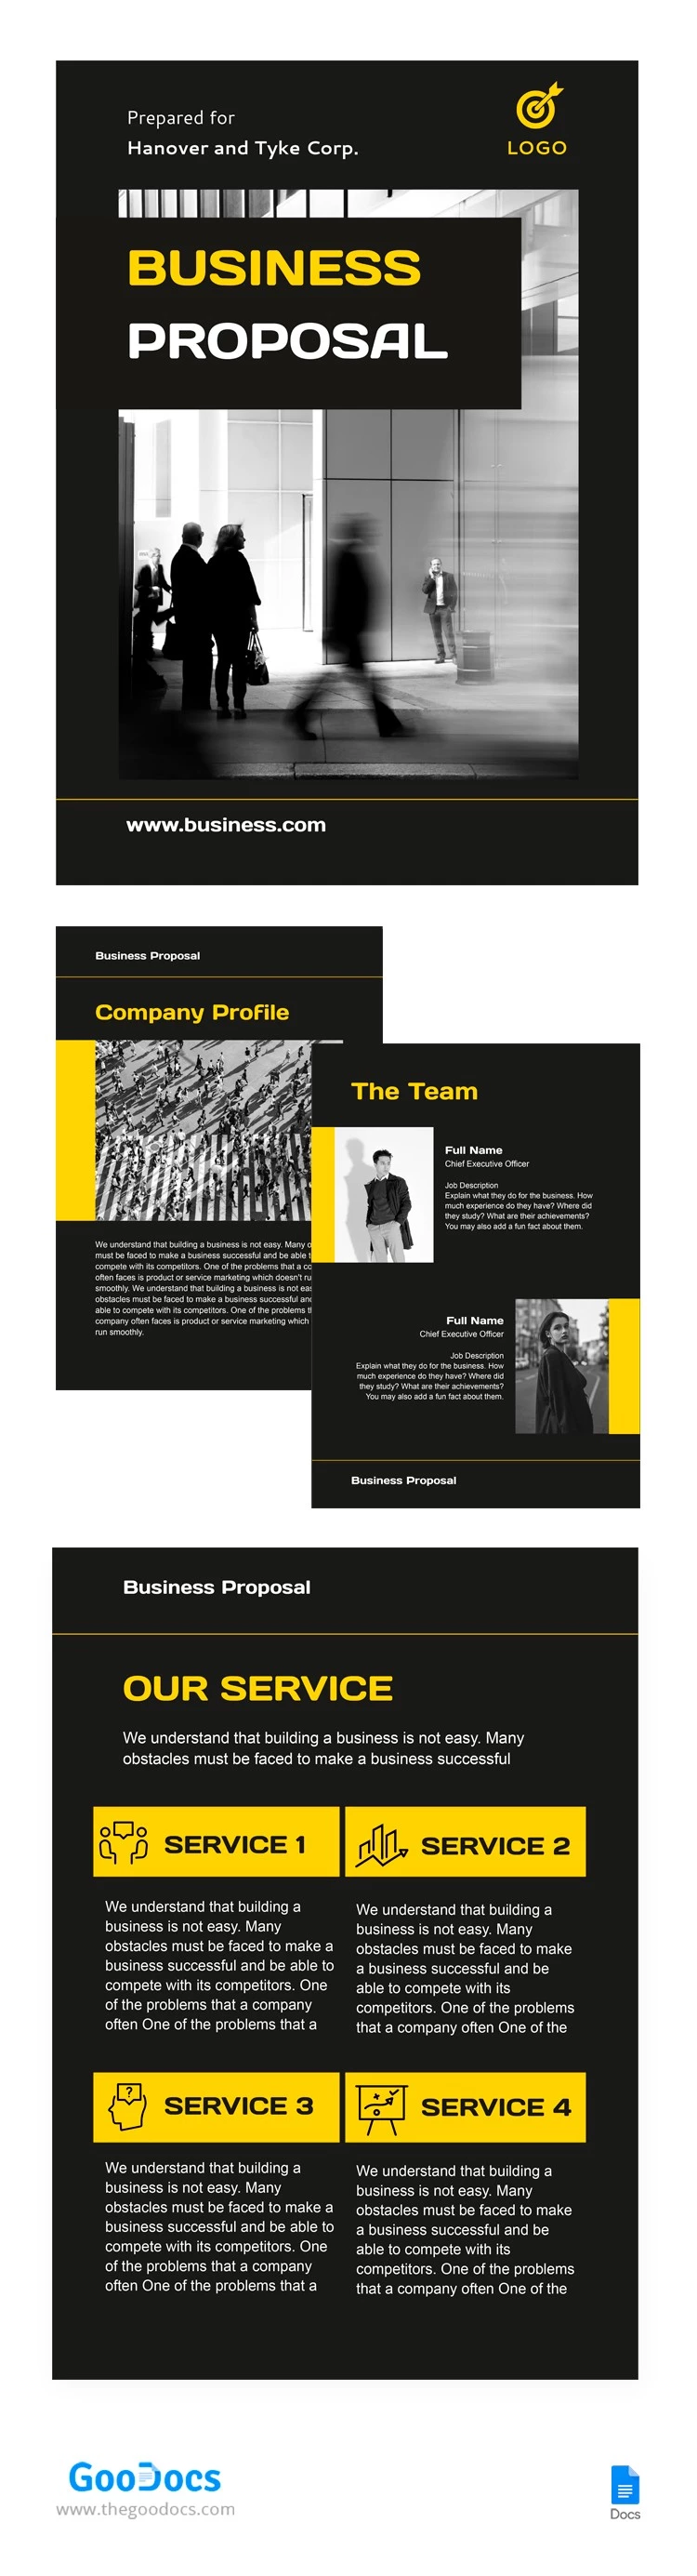 Black and Yellow Business Proposal - free Google Docs Template - 10066143